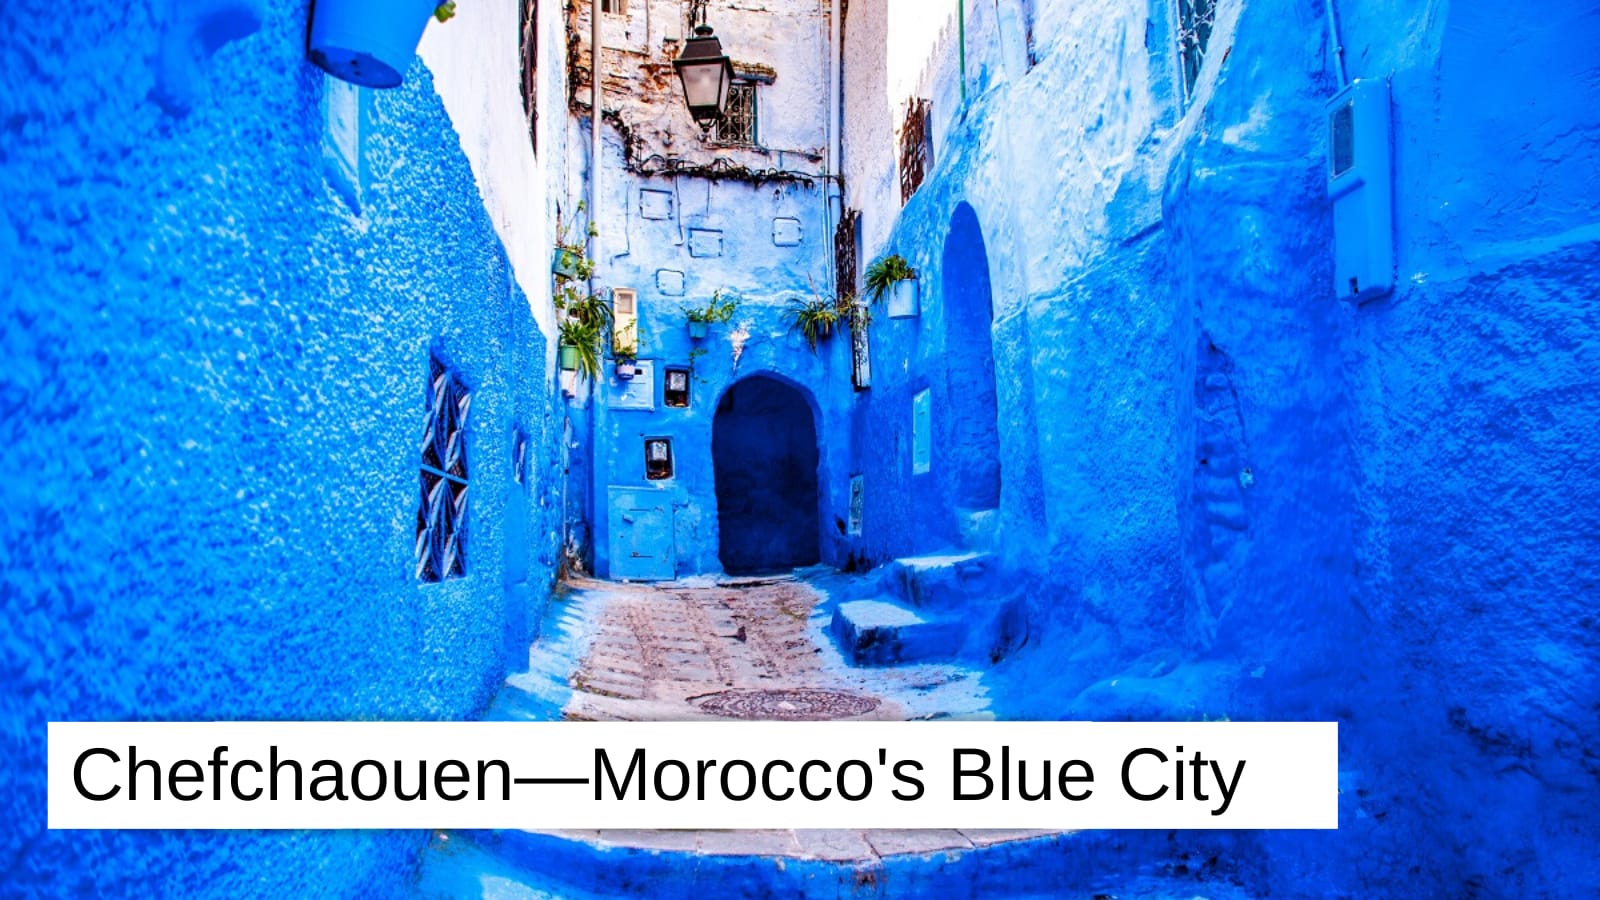 The Reality of Chefchaouen: Morocco's Blue City